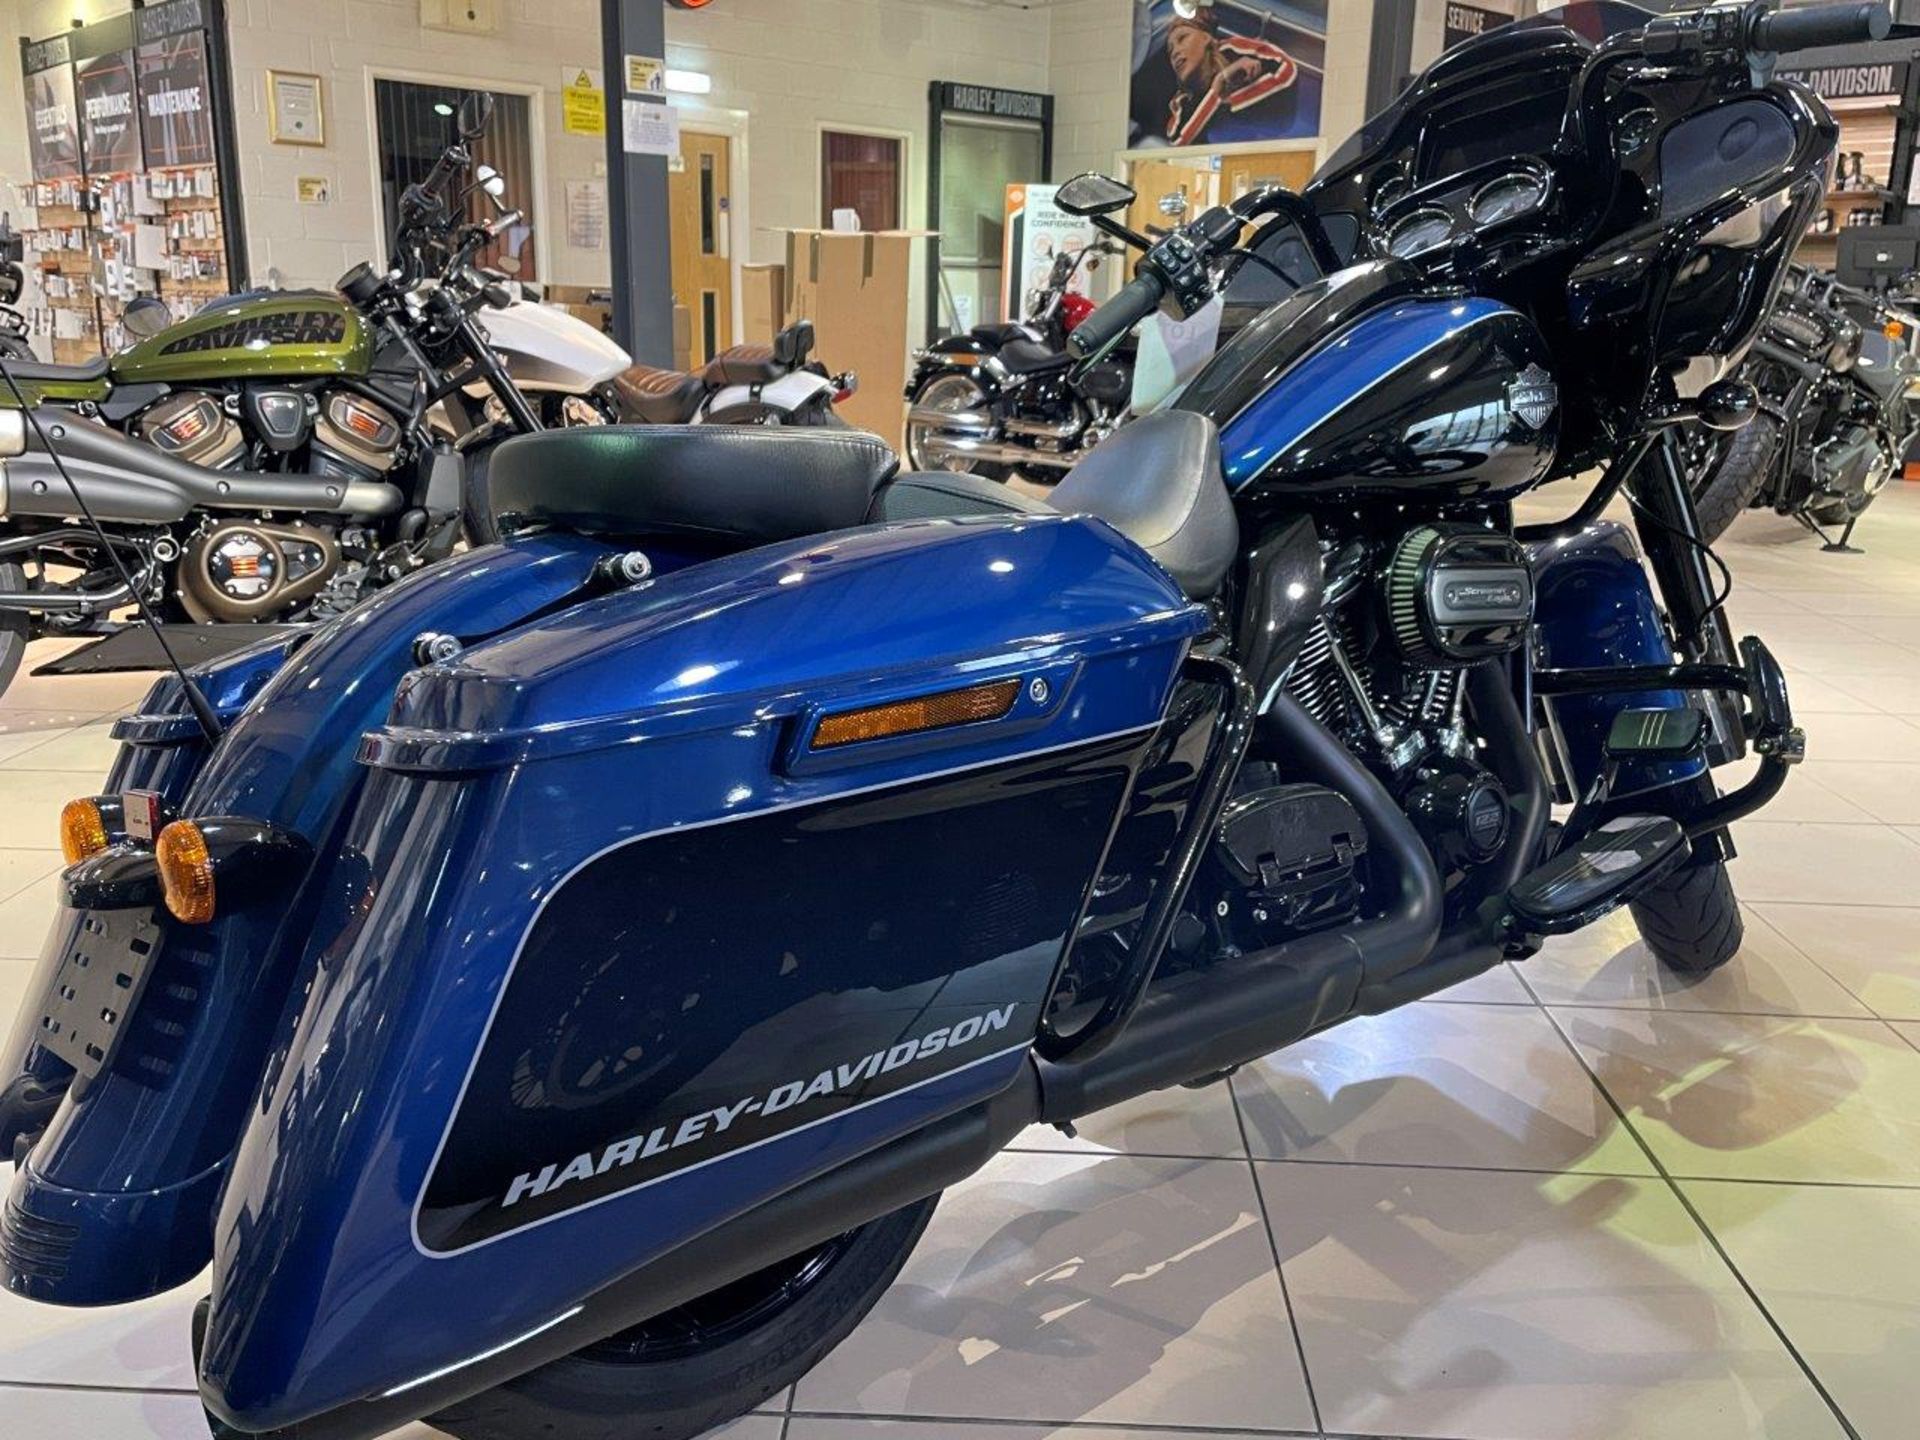 Harley Davidson FLTRXS Road Glide Special, with stage 3 upgrade Motorbike (May 2022) - Bild 3 aus 20